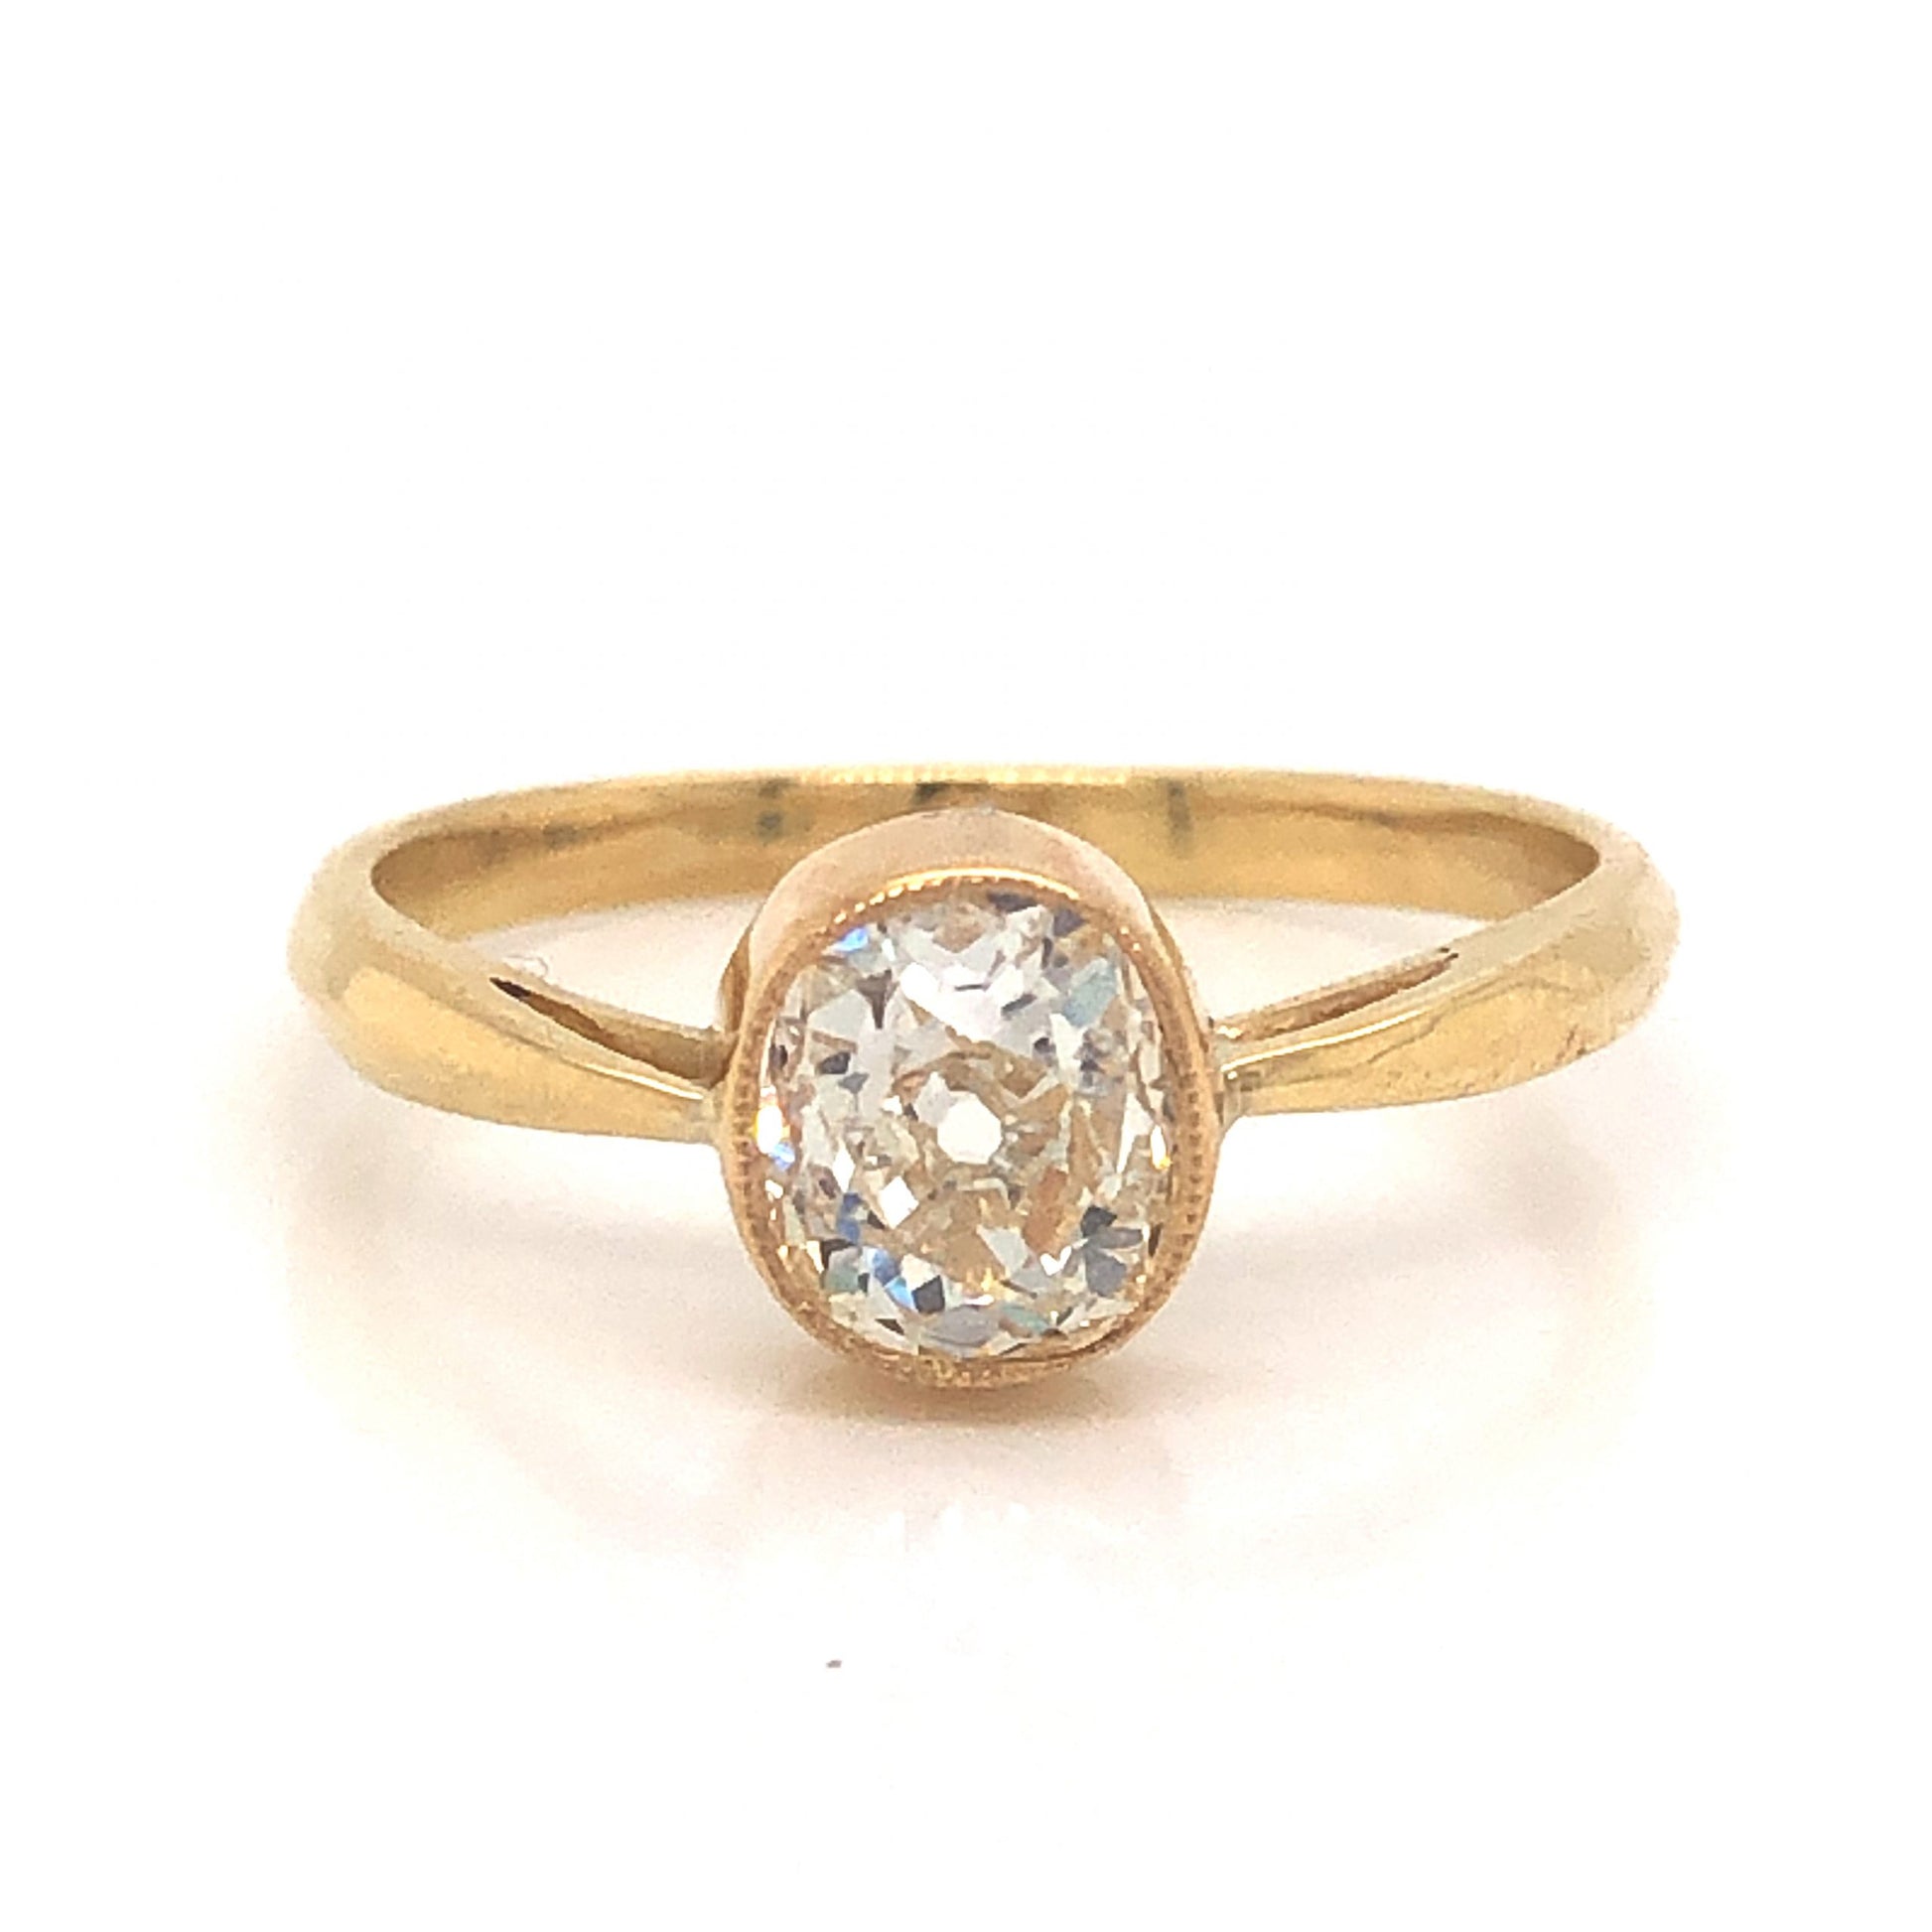 Solitaire Bezel Set Diamond Engagement Ring in 18k Yellow Gold